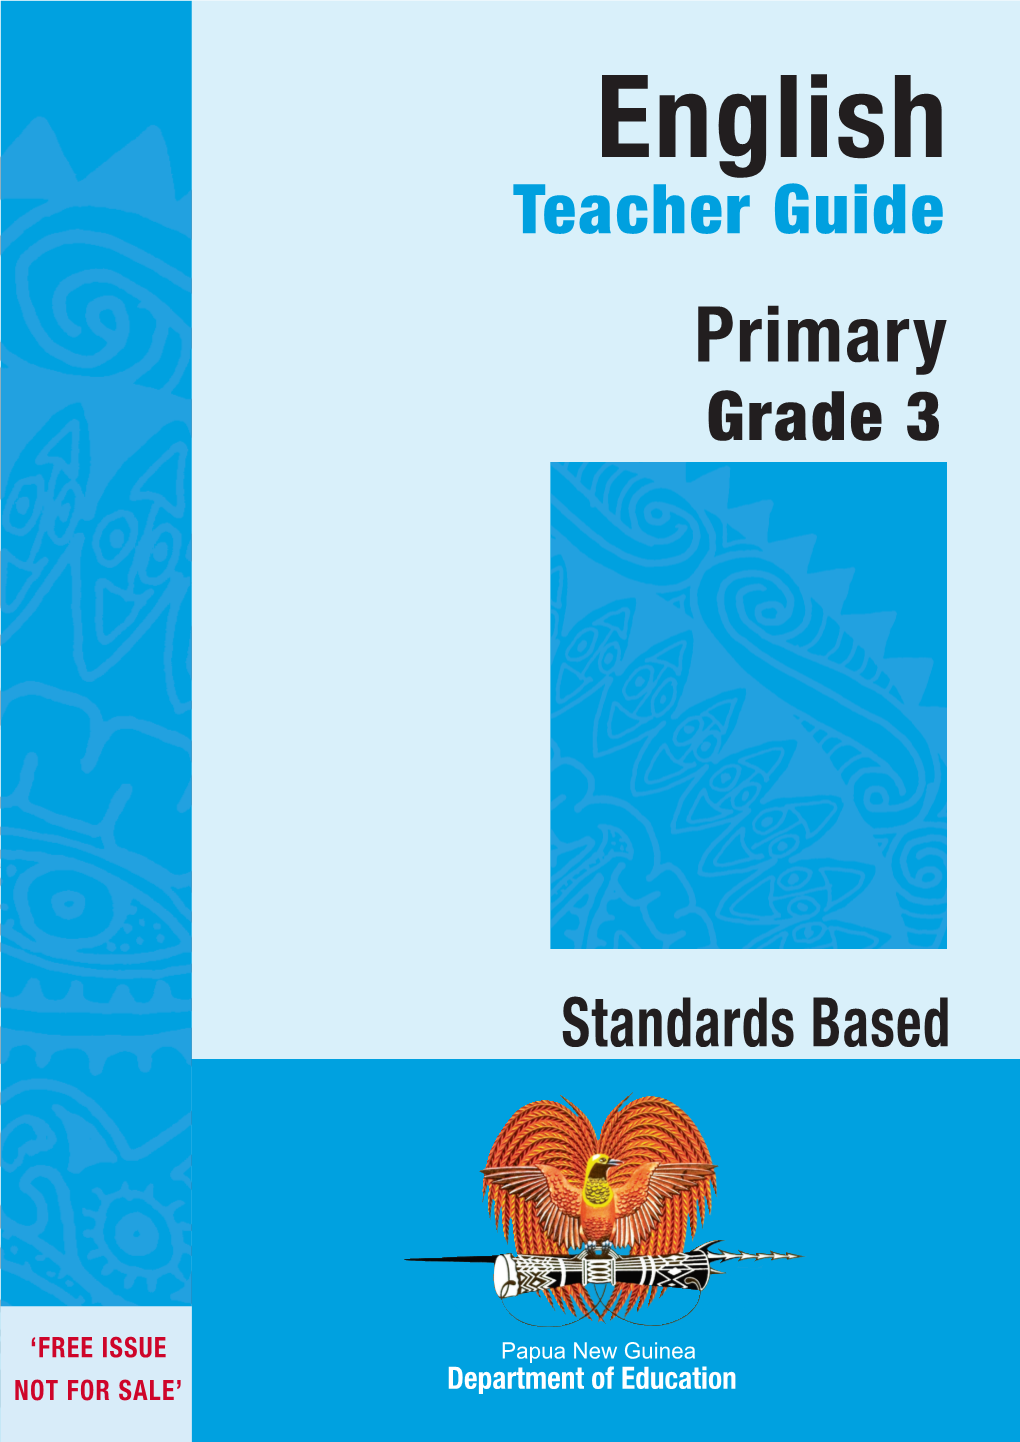 Grade 3 English Teacher Guide to Be Used in All Primary Schools Throughout Papua New Guinea